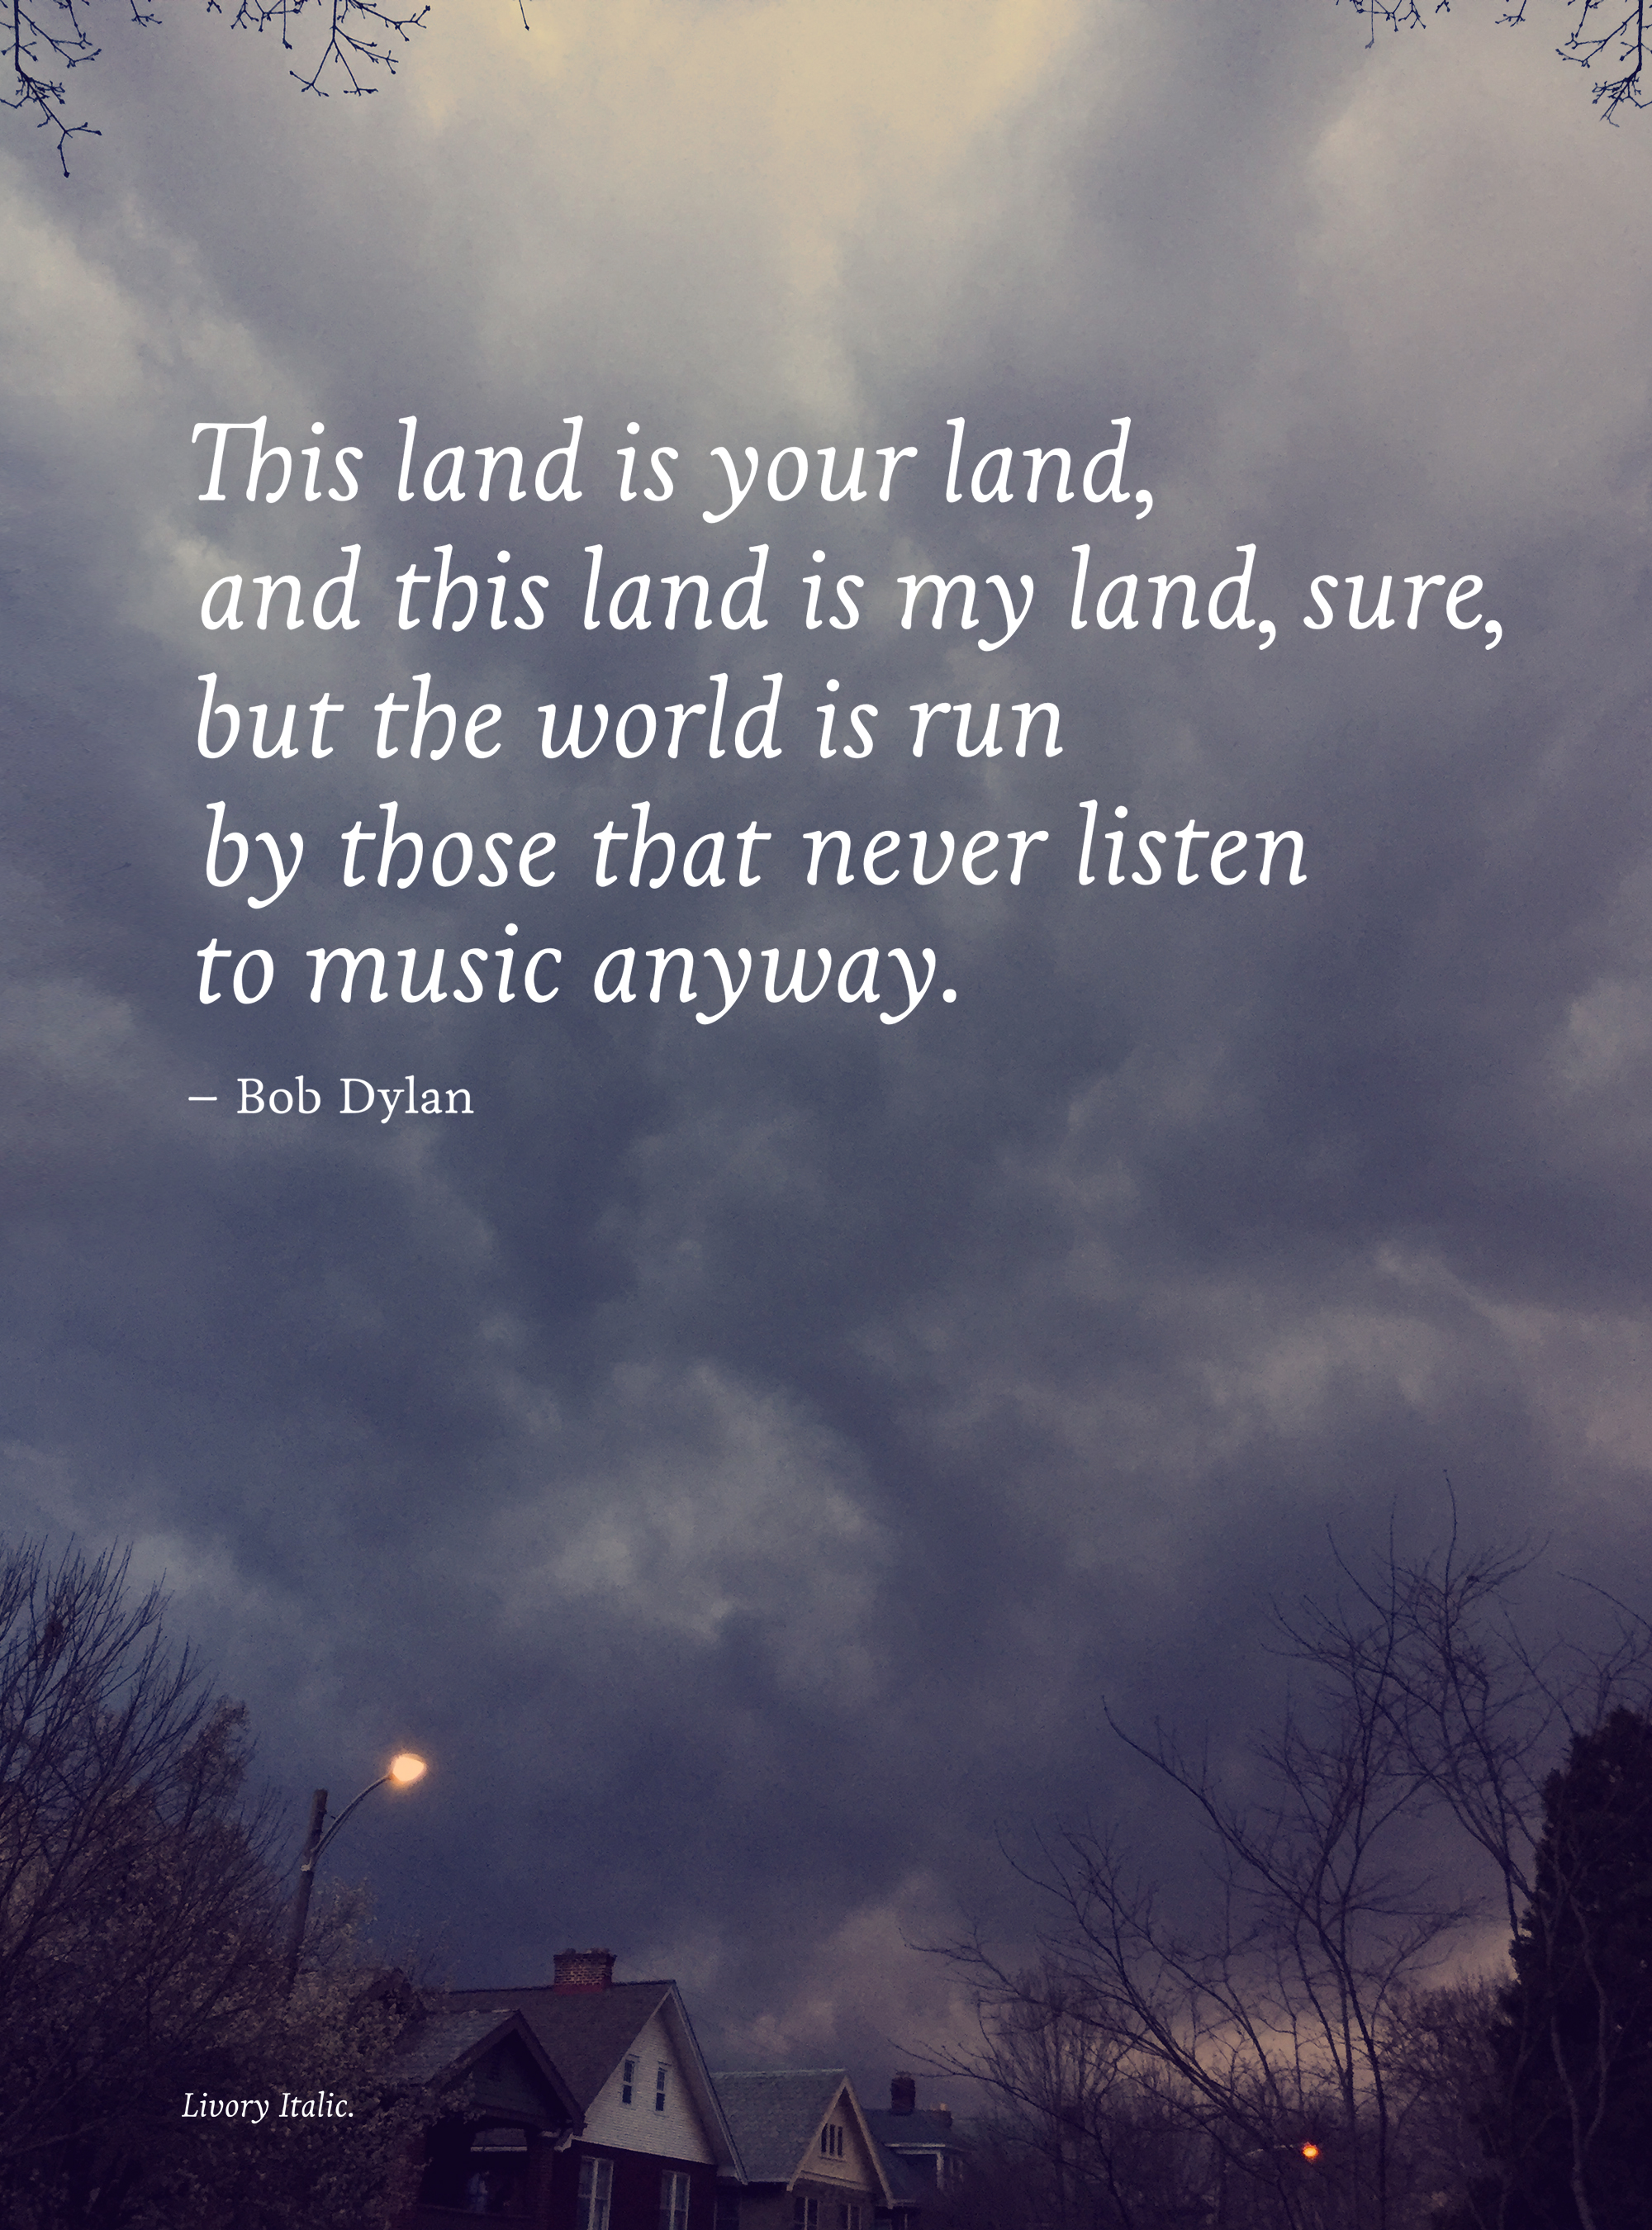 Our Land - Todd Roeth